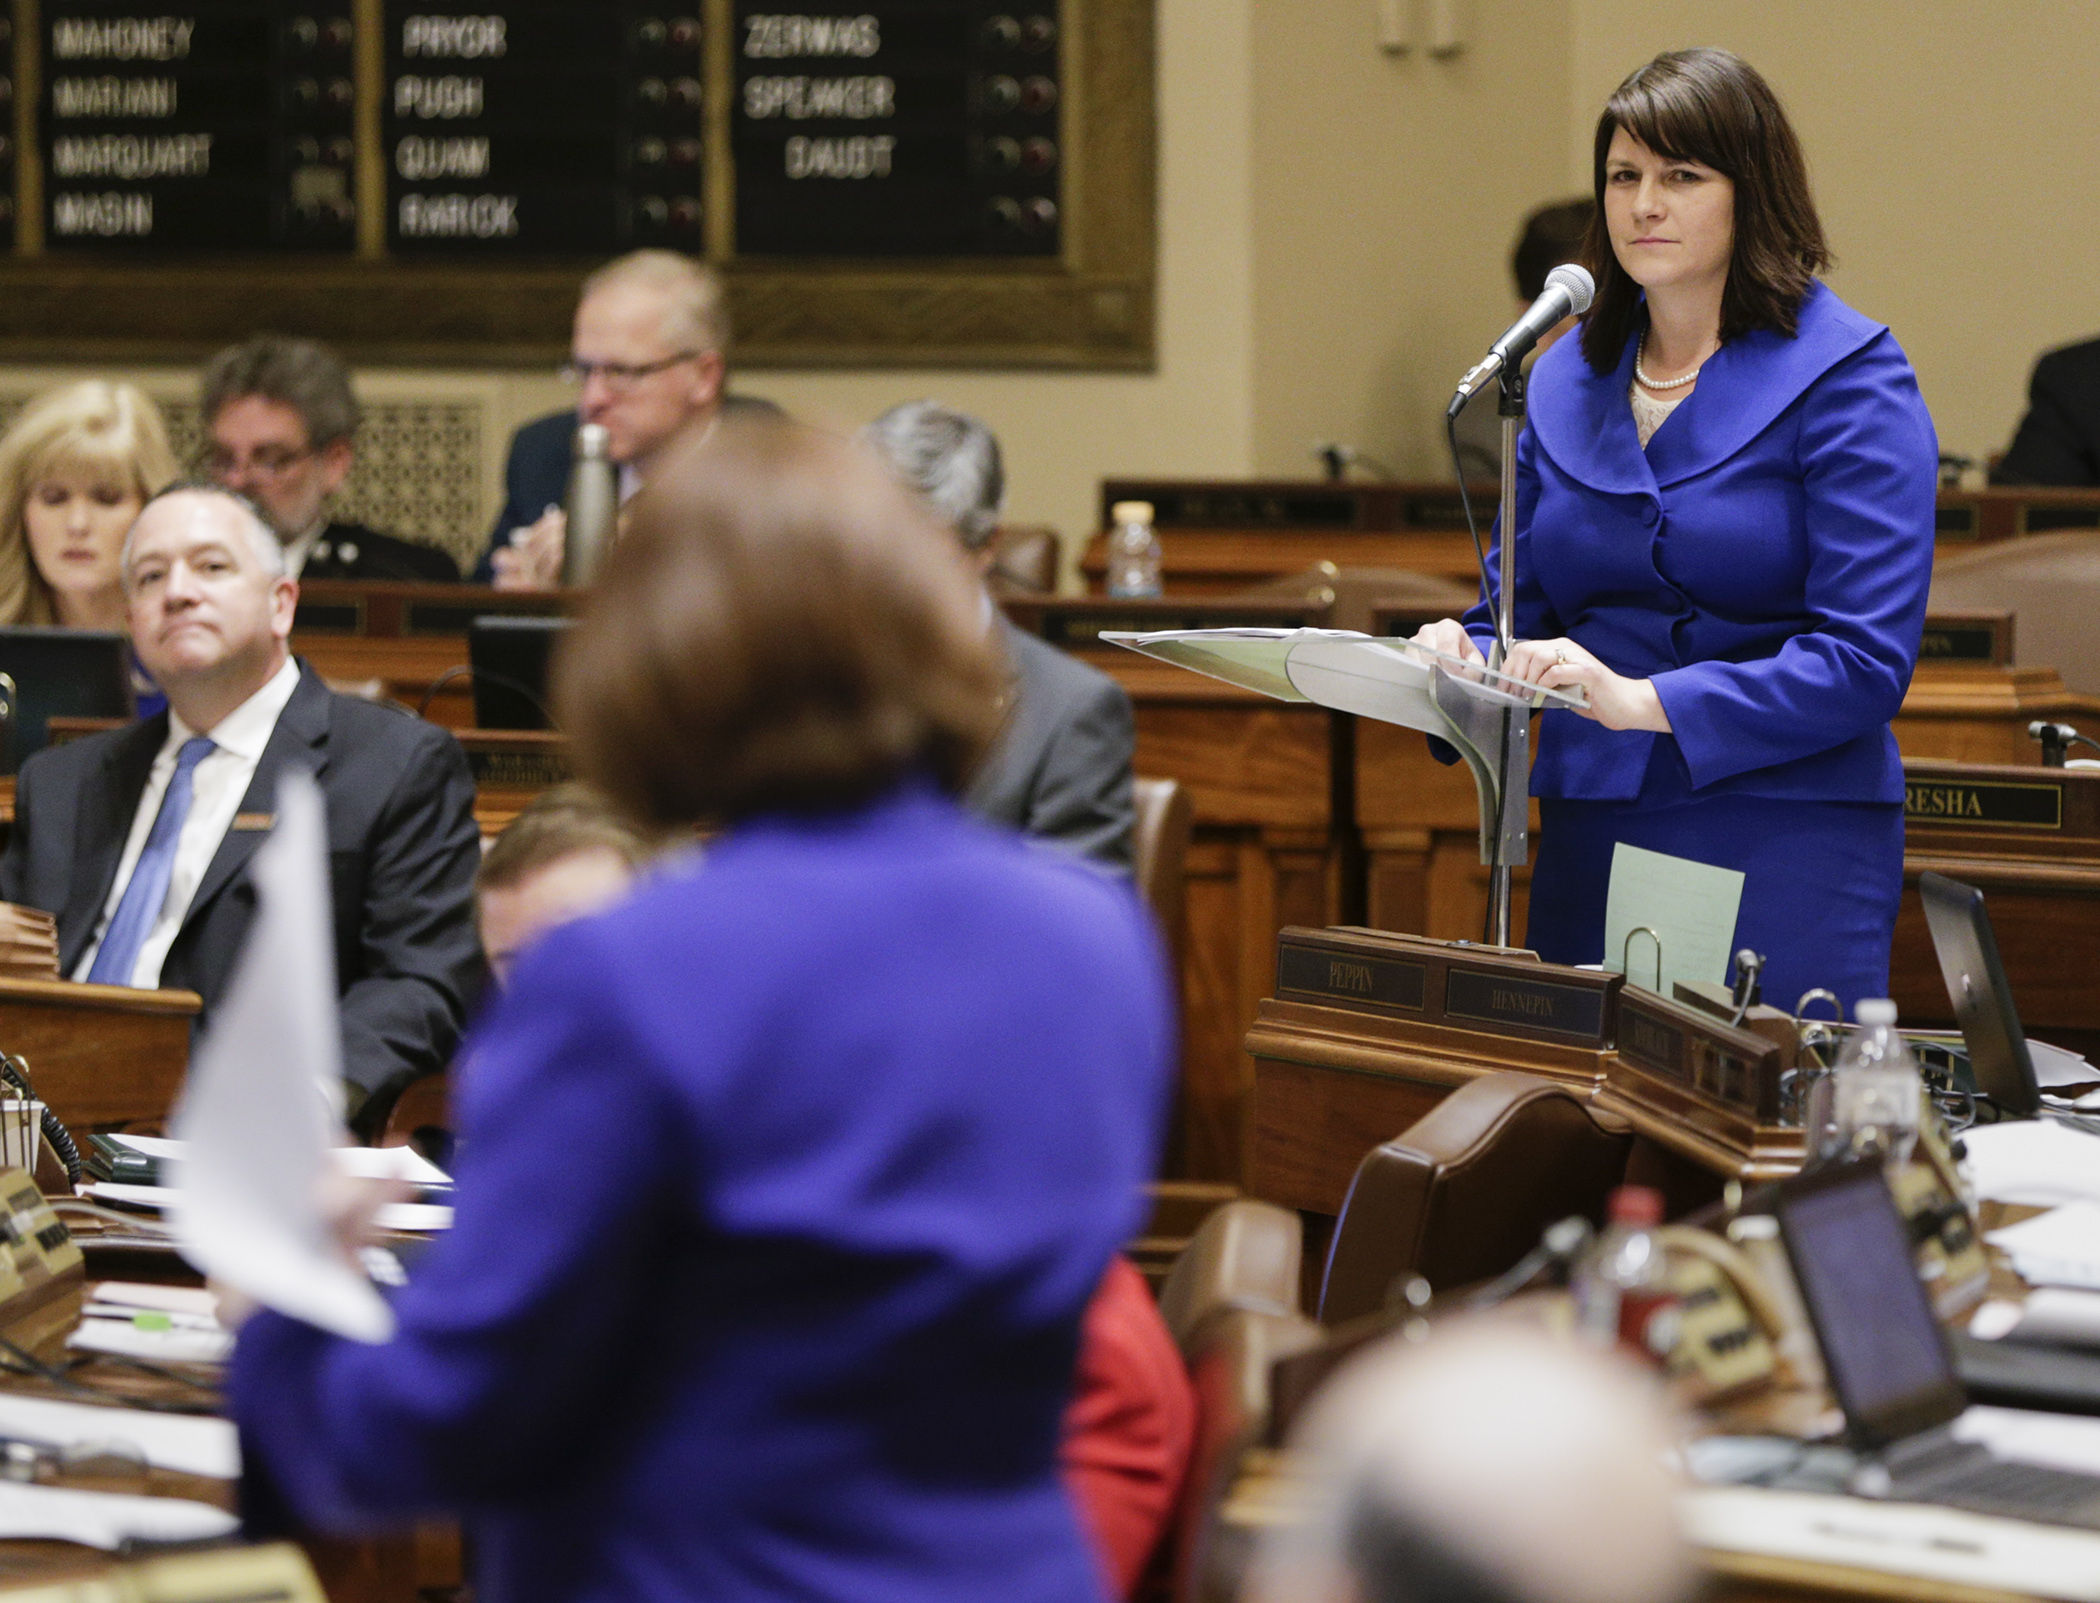 House Majority Leader Joyce Peppin listens as Rep. Tina Liebling discusses one of her amendments during a Feb. 16 debate on the Permanent Rules of the House. Photo by Paul Battaglia